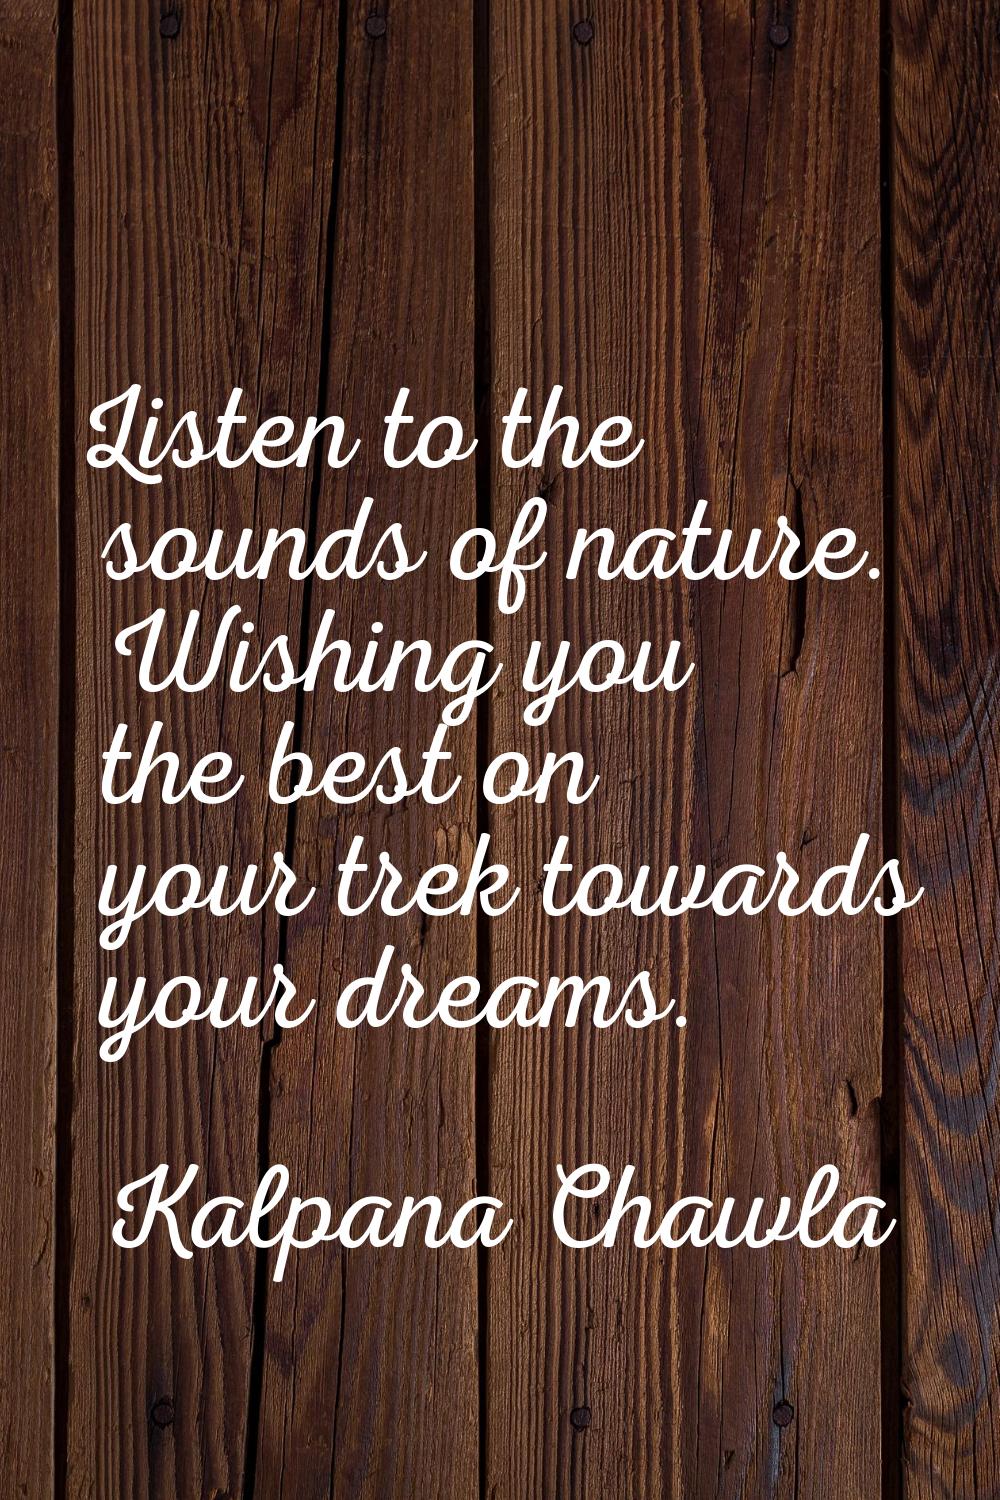 Listen to the sounds of nature. Wishing you the best on your trek towards your dreams.